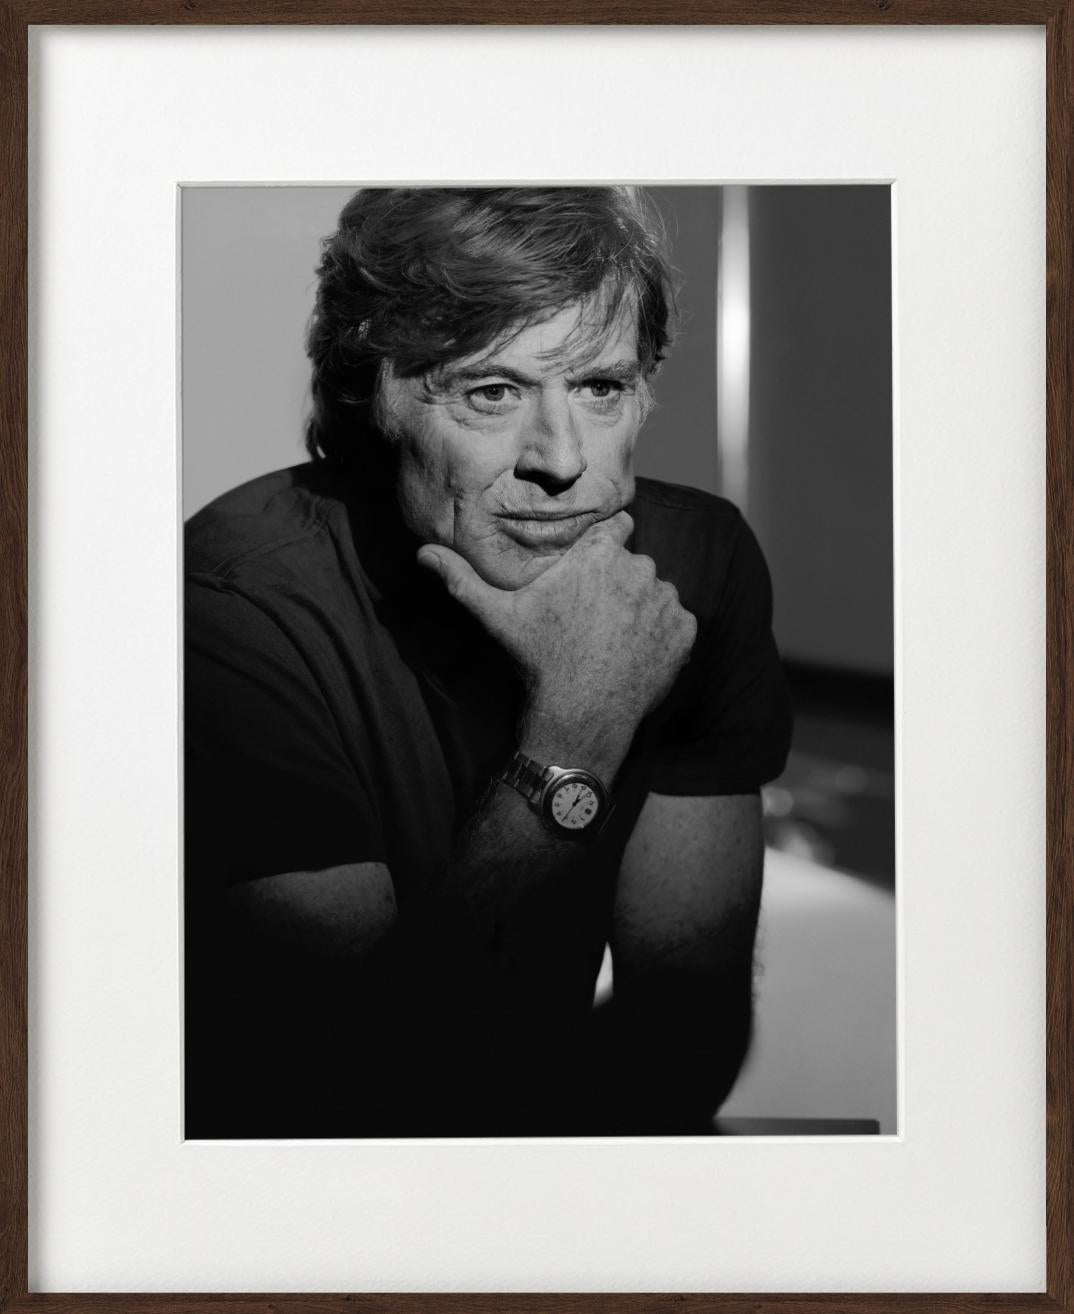 Robert Redford Unseen - Portrait of the actor, director and Hollywood legend - Photograph by Albert Watson